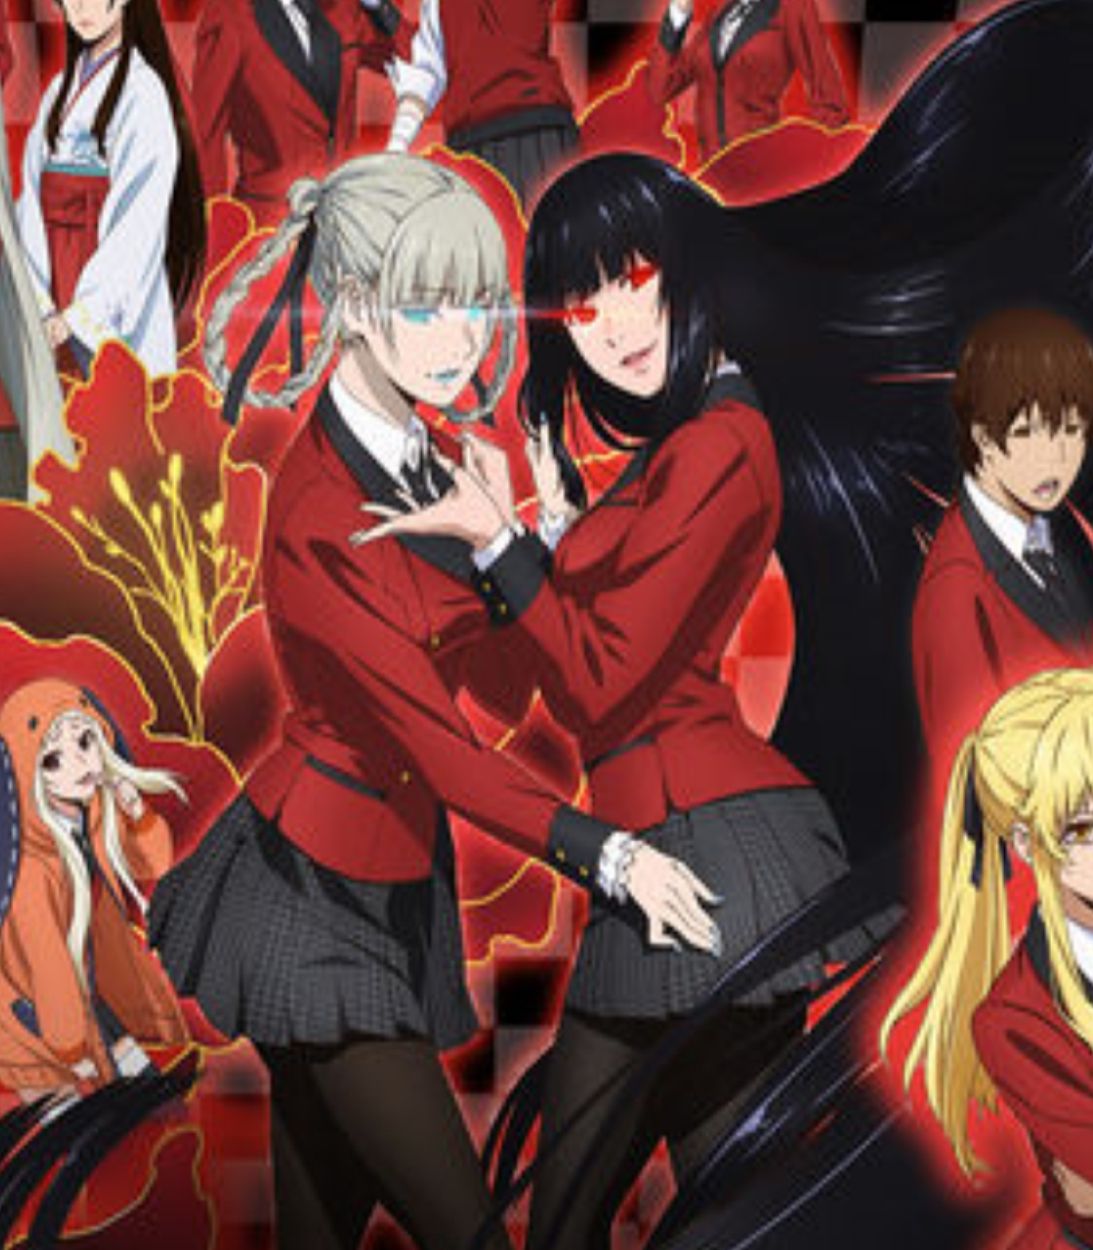 The main cast of Kakegurui on a promotional poster